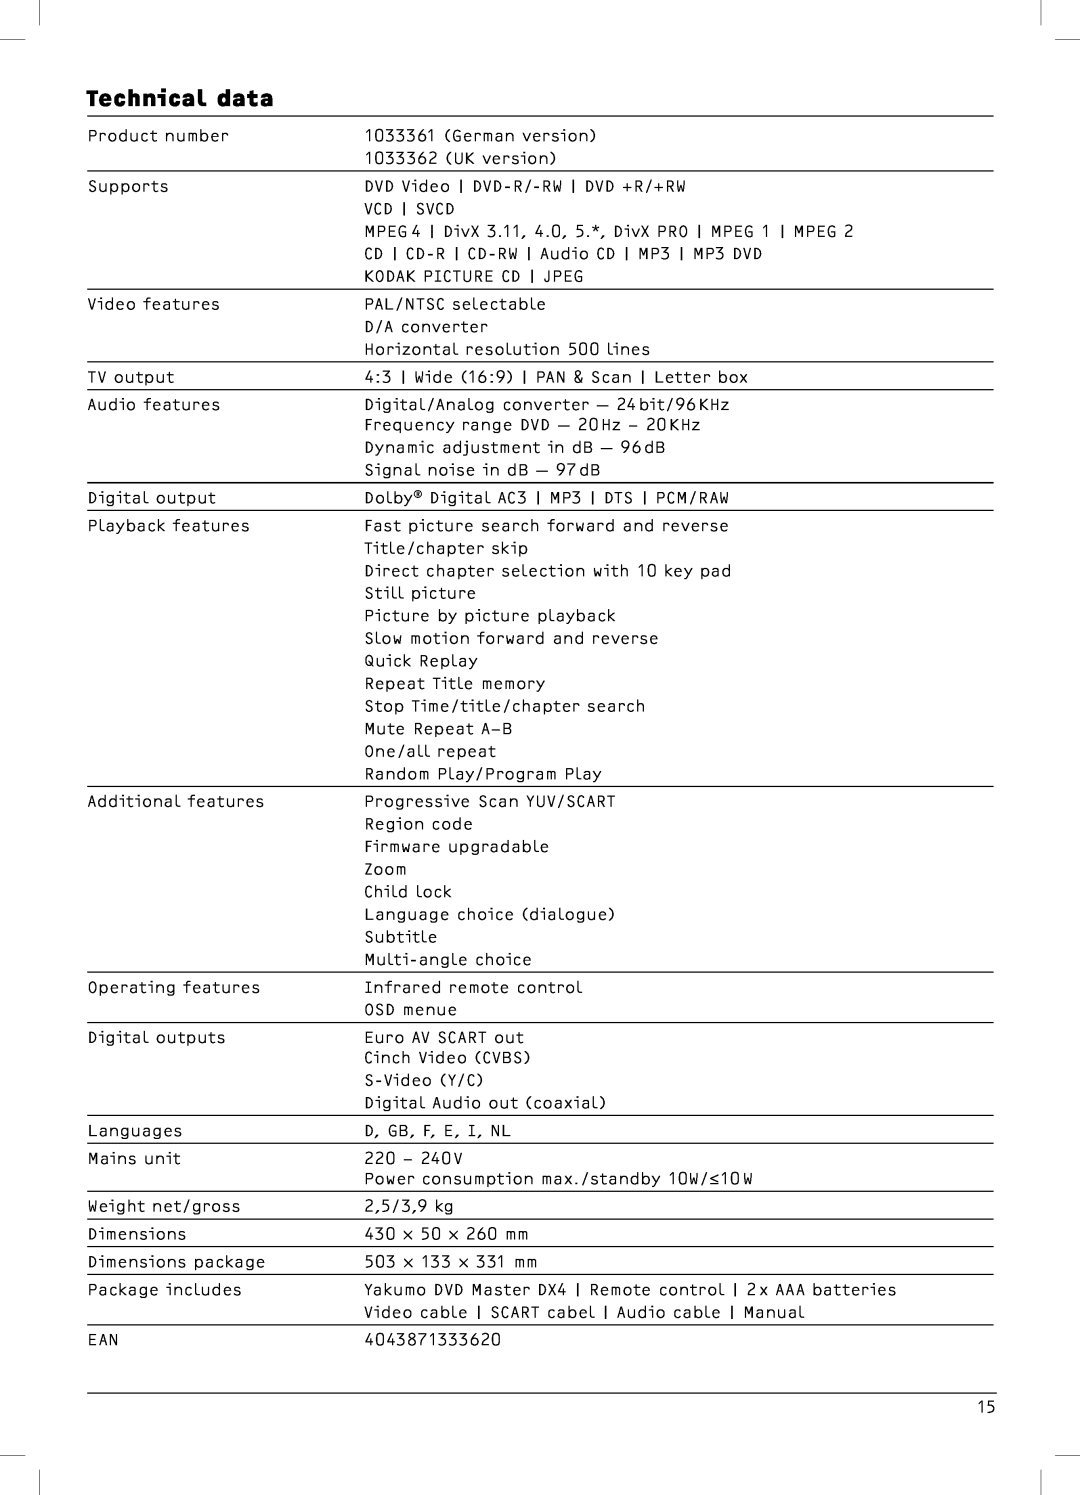 Dolby Laboratories DX4 manual Technical data 